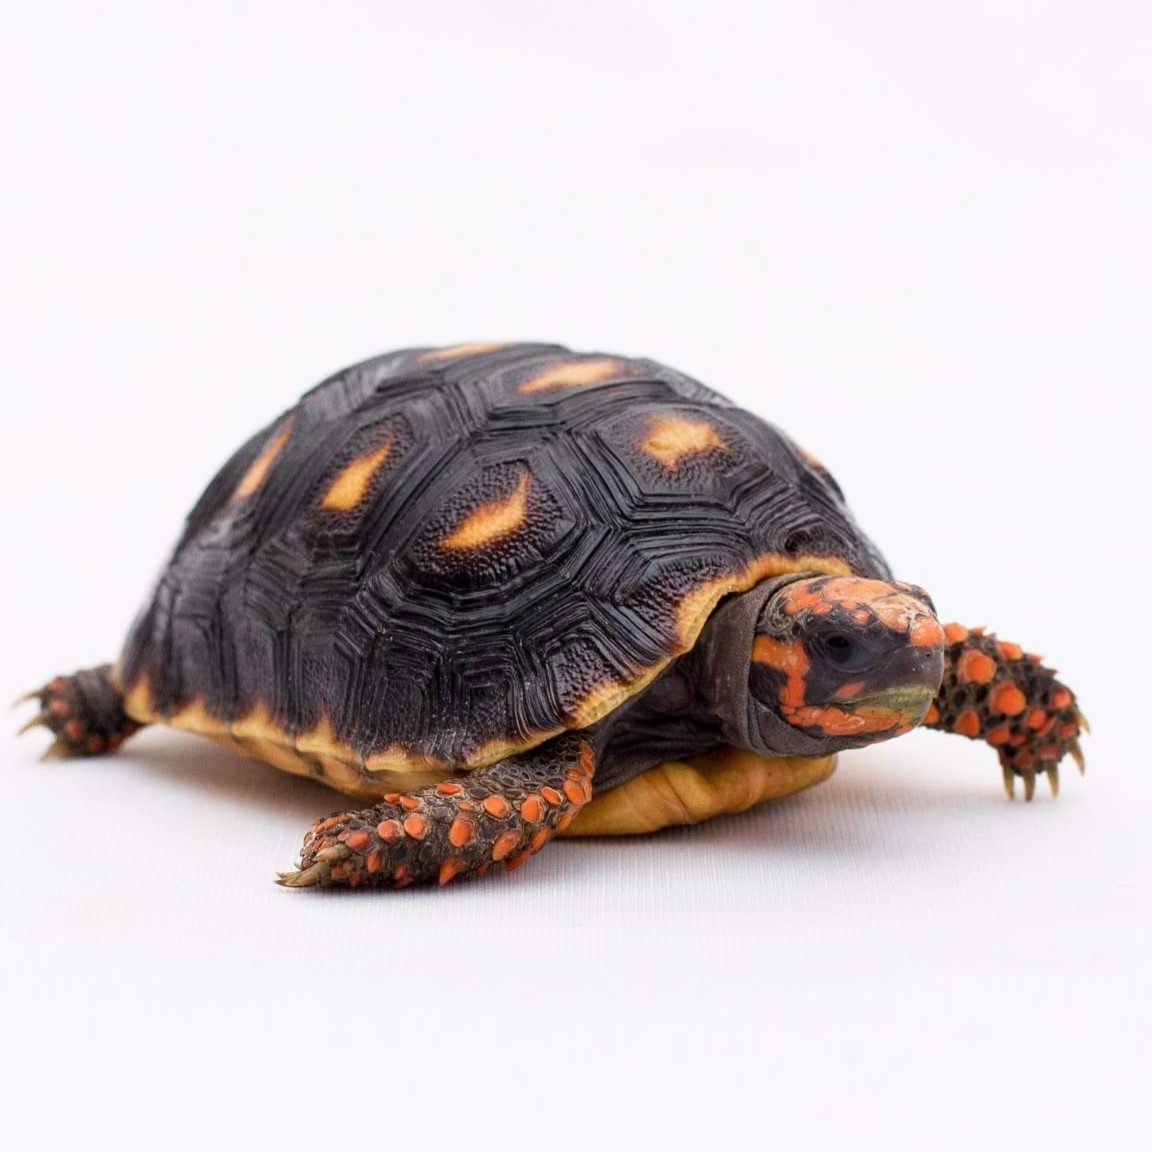 Baby Redfoot Tortoise